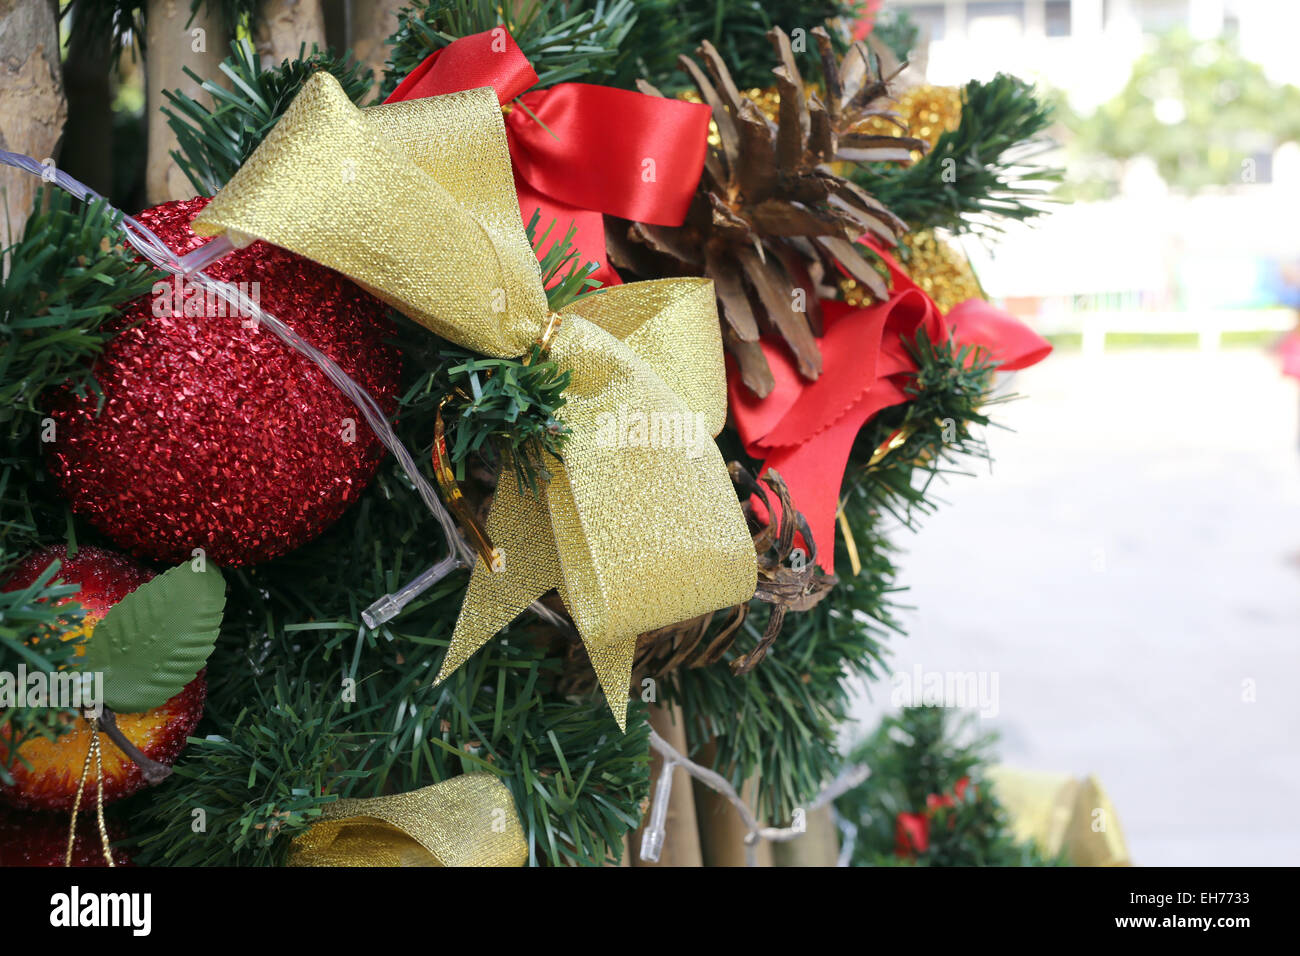 Decorate the Christmas tree for the New Year. Stock Photo